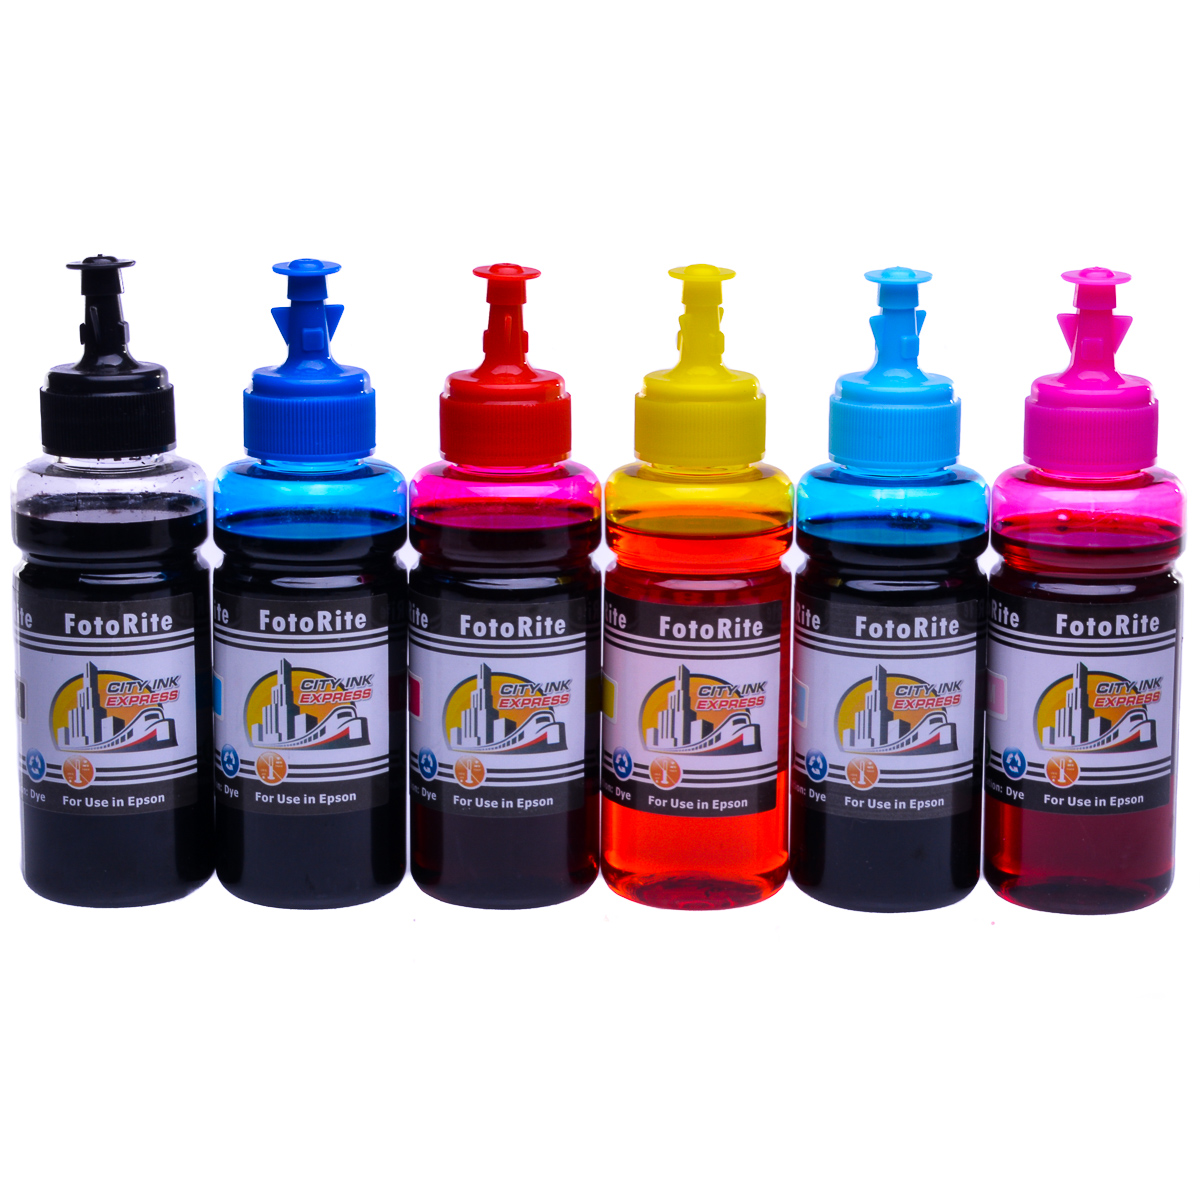 Cheap Multipack dye ink refill replaces Epson XP-750